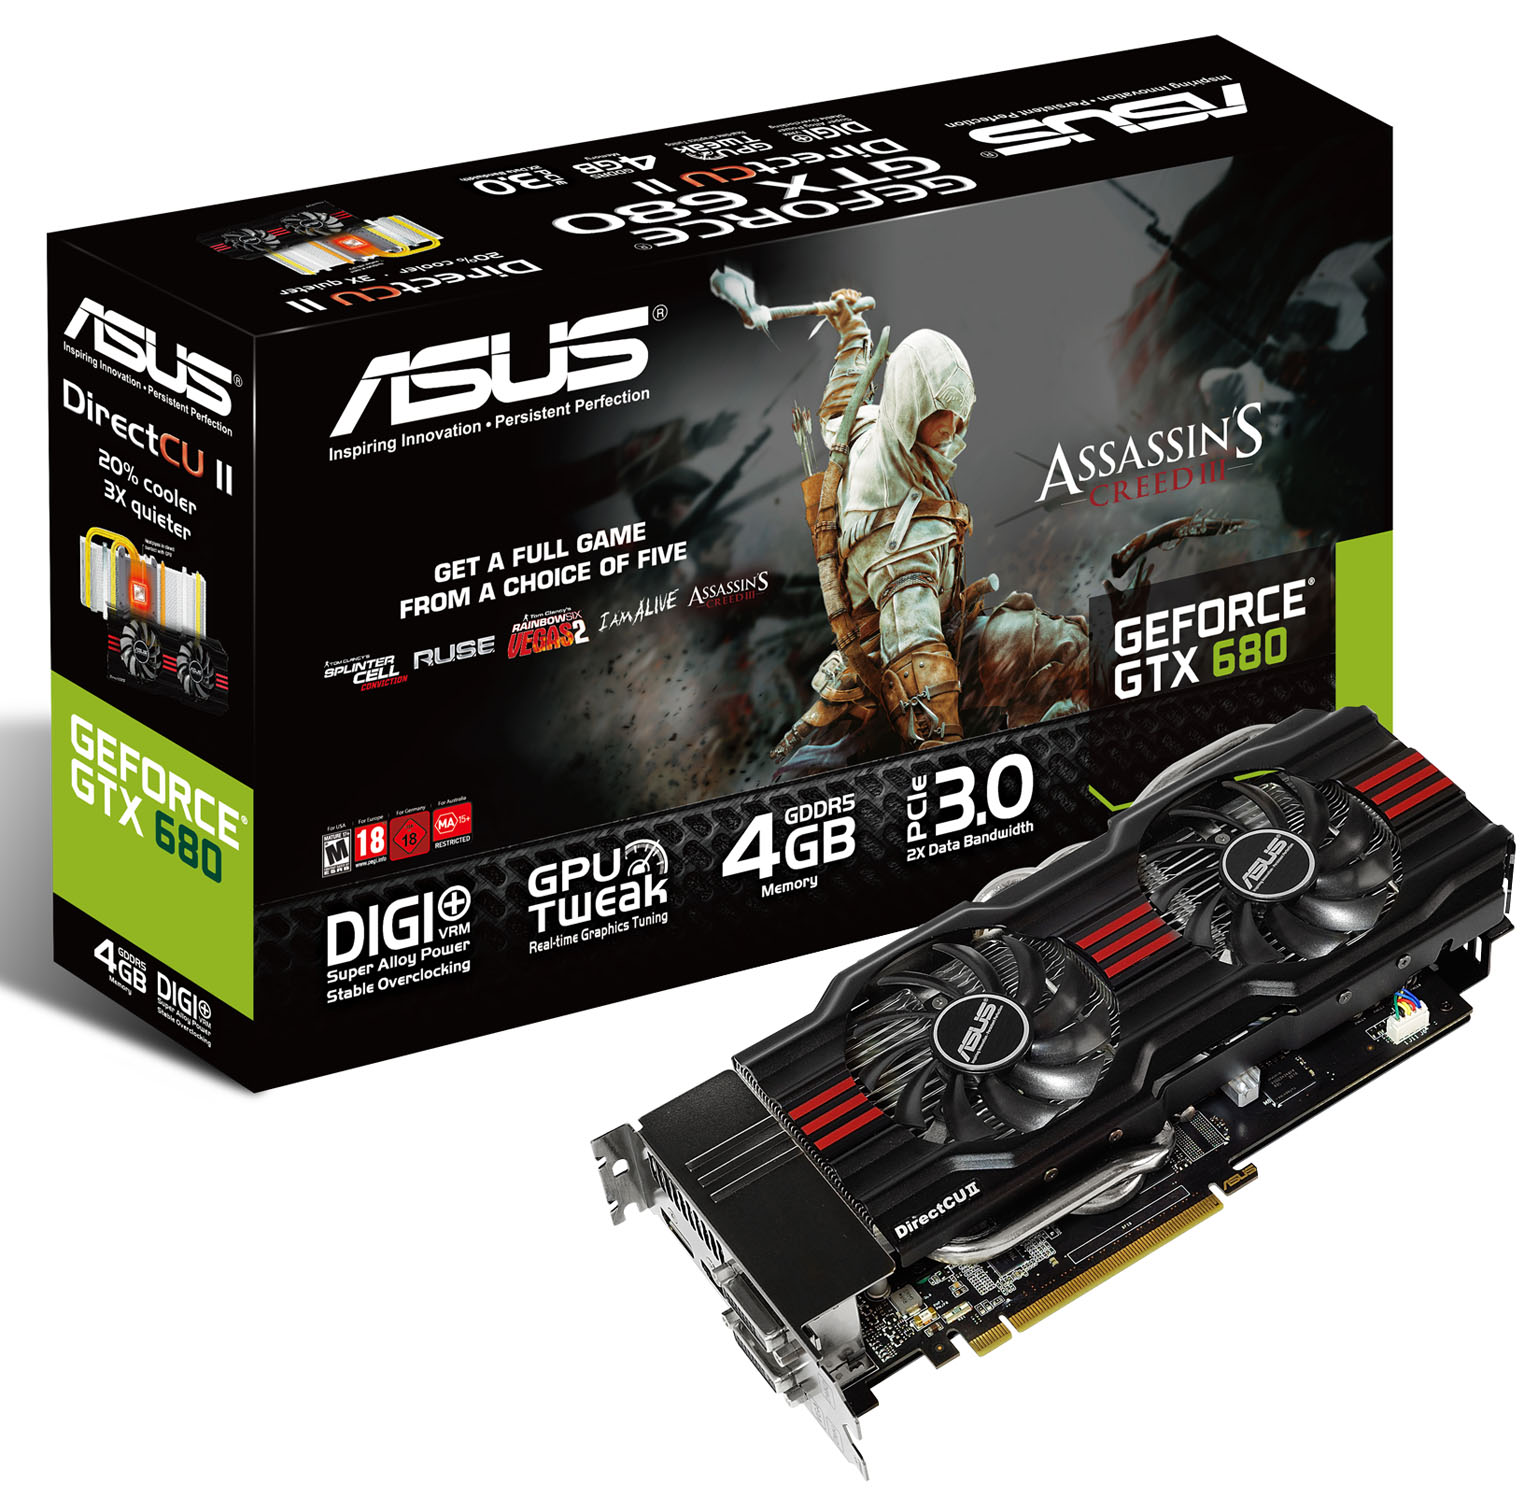 Media asset (photo, screenshot, or image in full size) related to contents posted at 3dfxzone.it | Image Name: news18395ASUS-GeForce-GTX-680-DirectCU-II-dual-slot_4.jpg